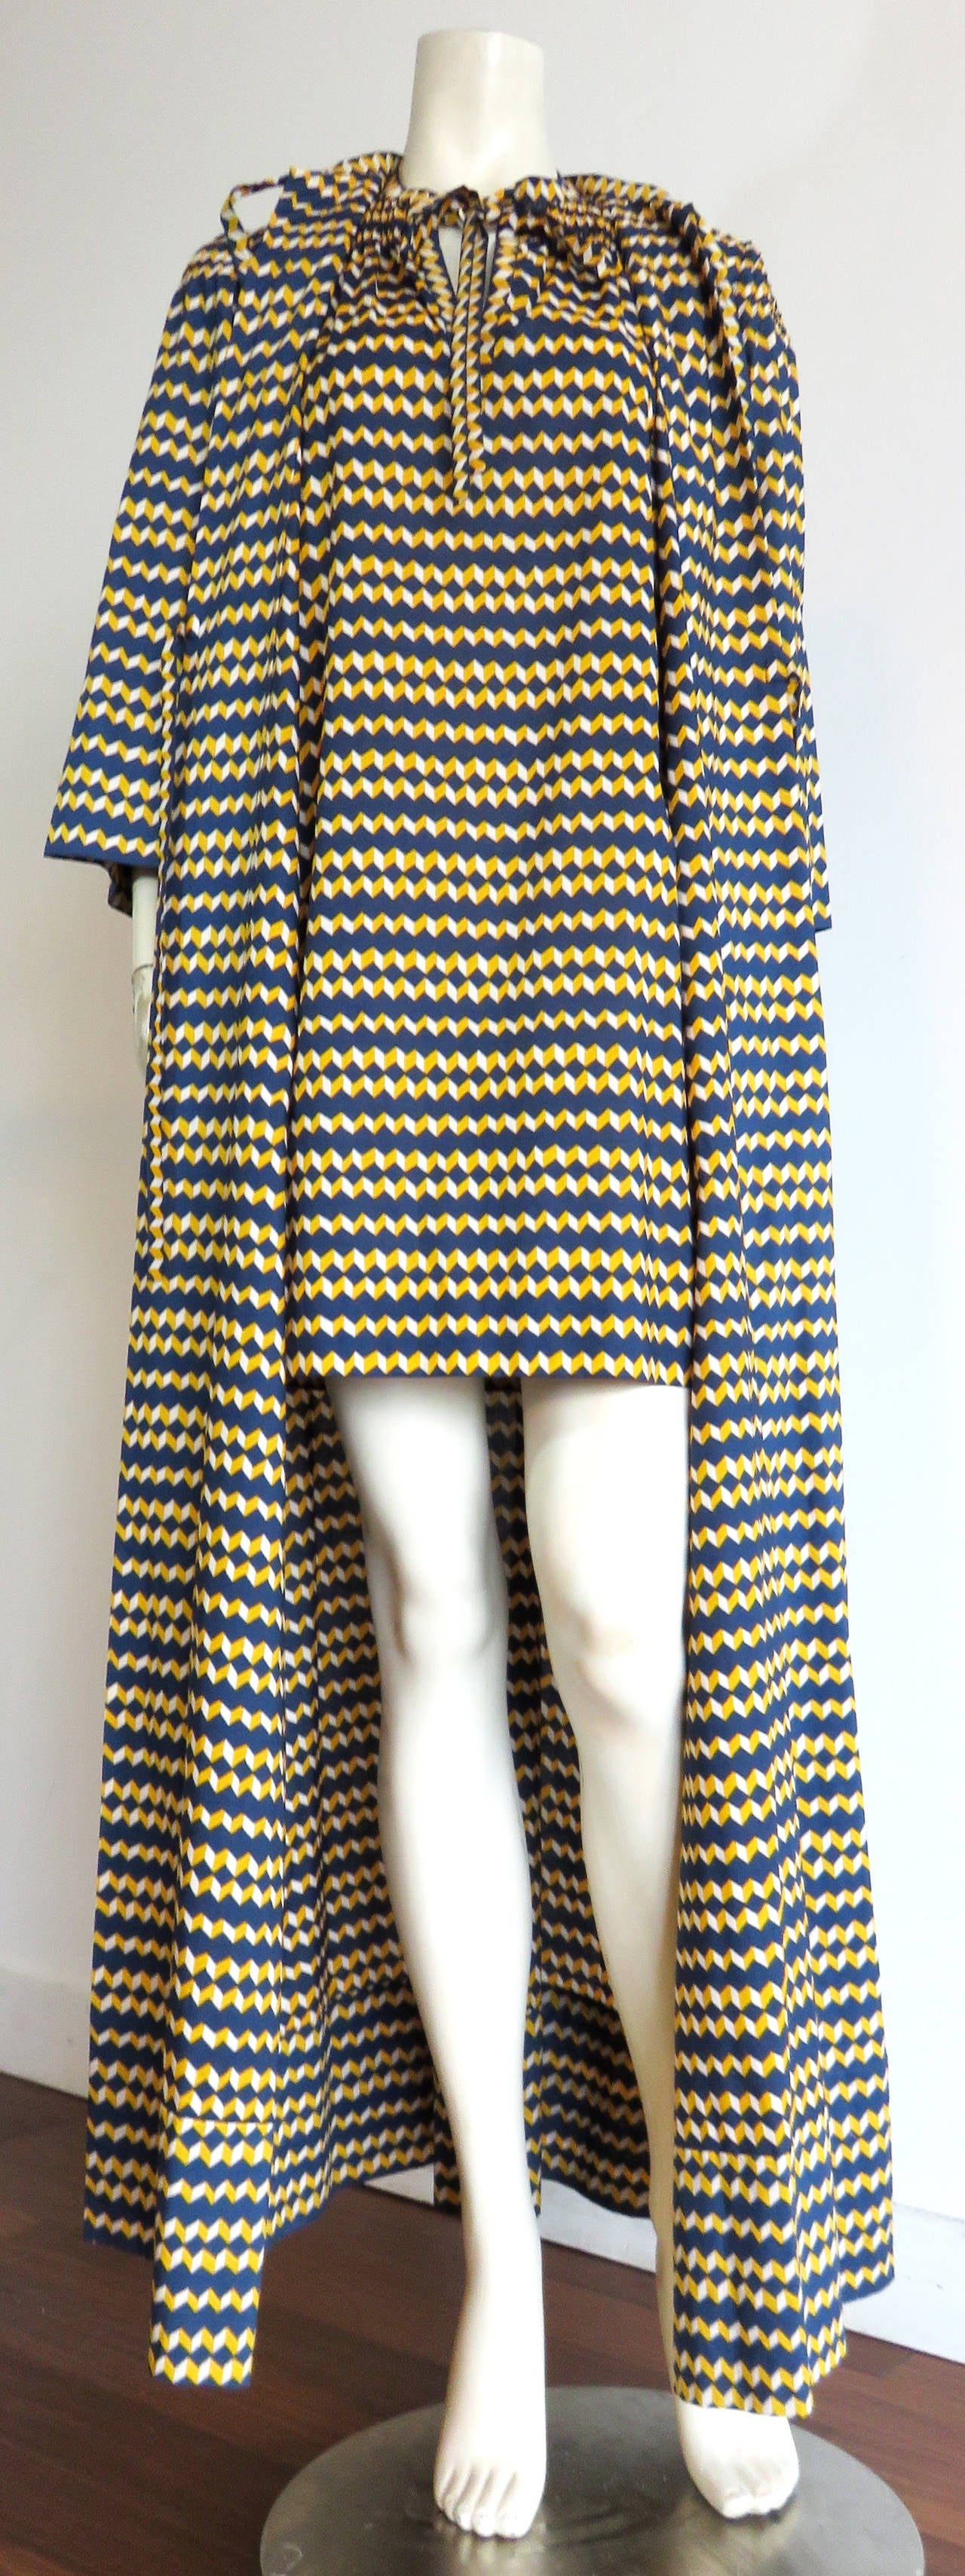 Never worn, 1970's, GIVENCHY Couture, 2pc., chevron striped robe & tunic dress set.

Both the long robe, and matching tunic dress are made of crisp, printed cotton fabrication in marine-blue ground with golden-yellow, and white chevron stripes. 